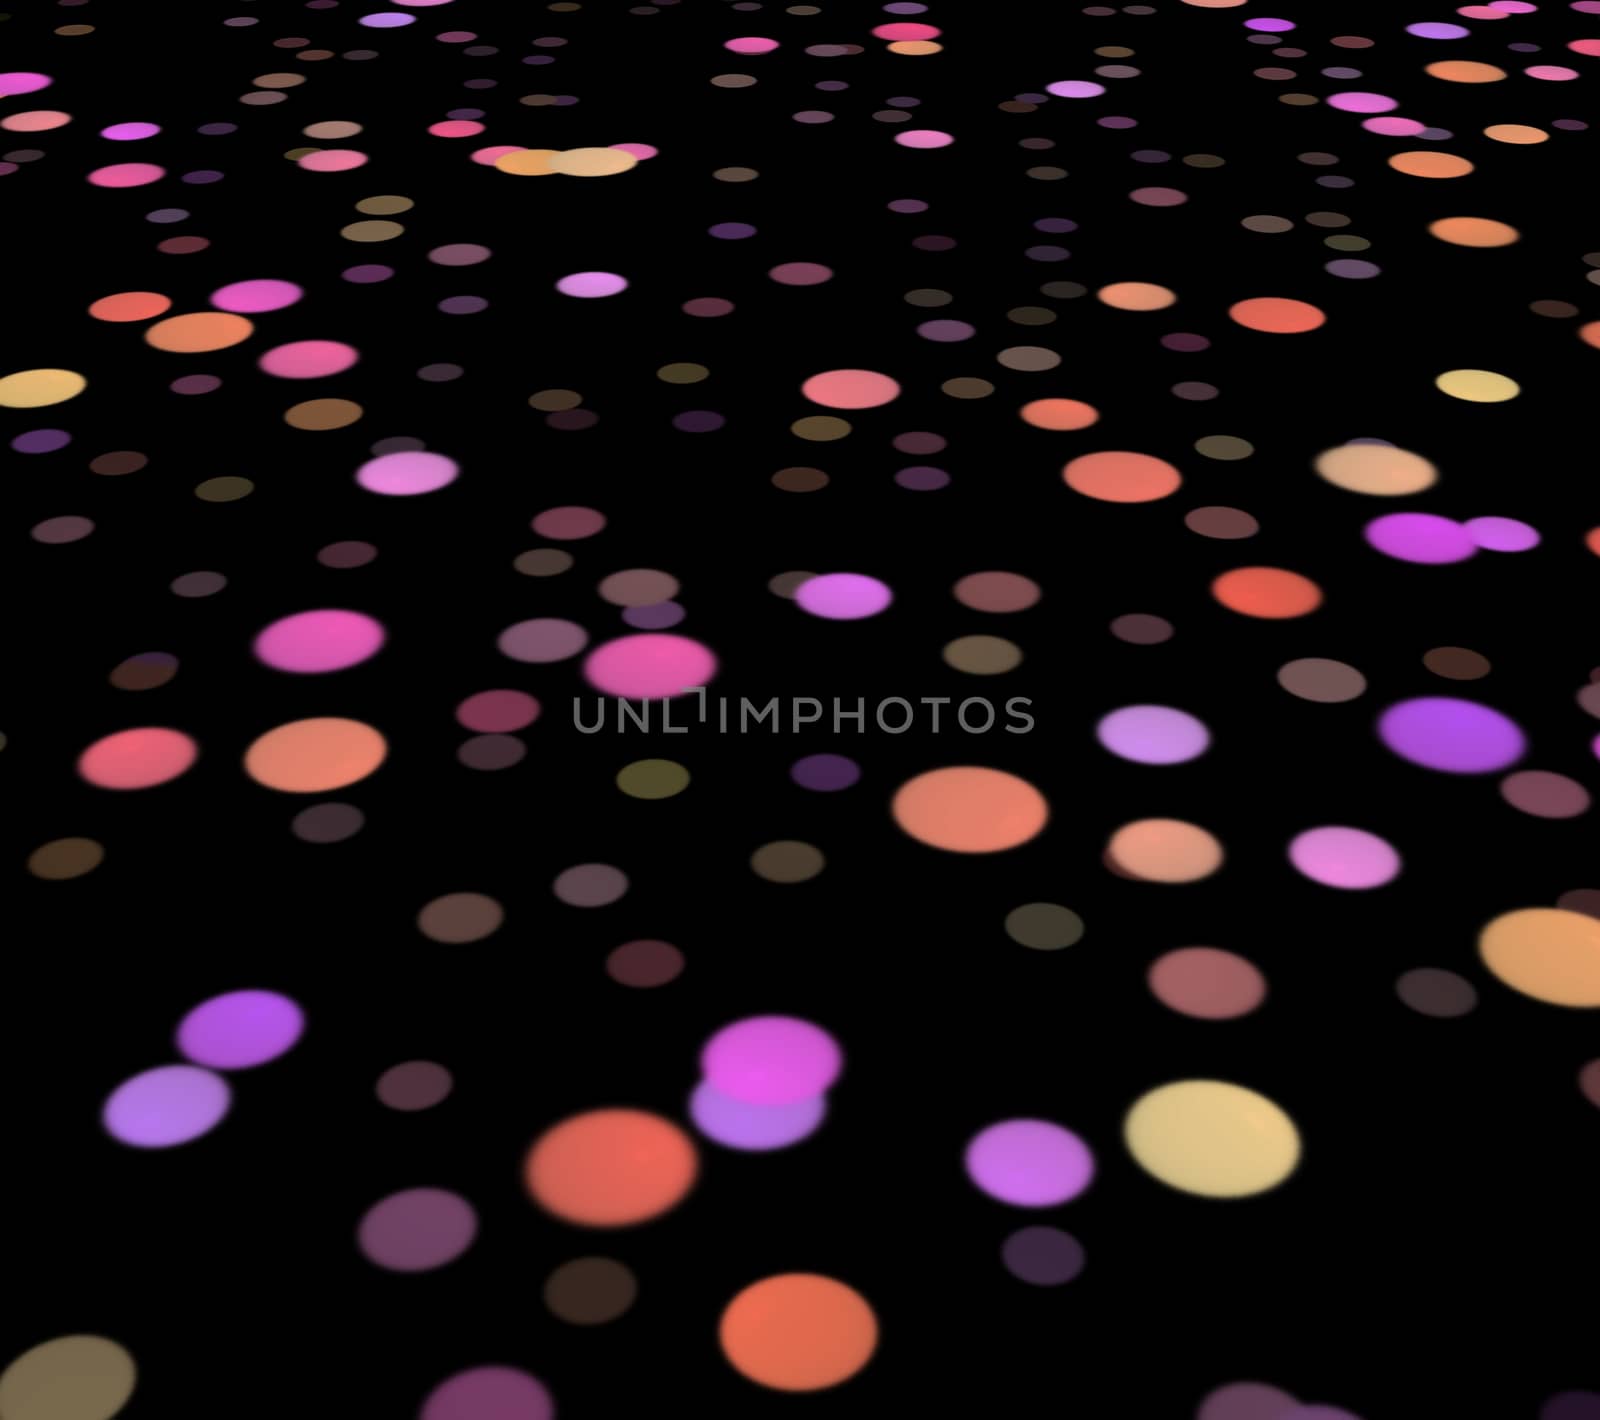 
Colored circles on a black background on the surface, going up